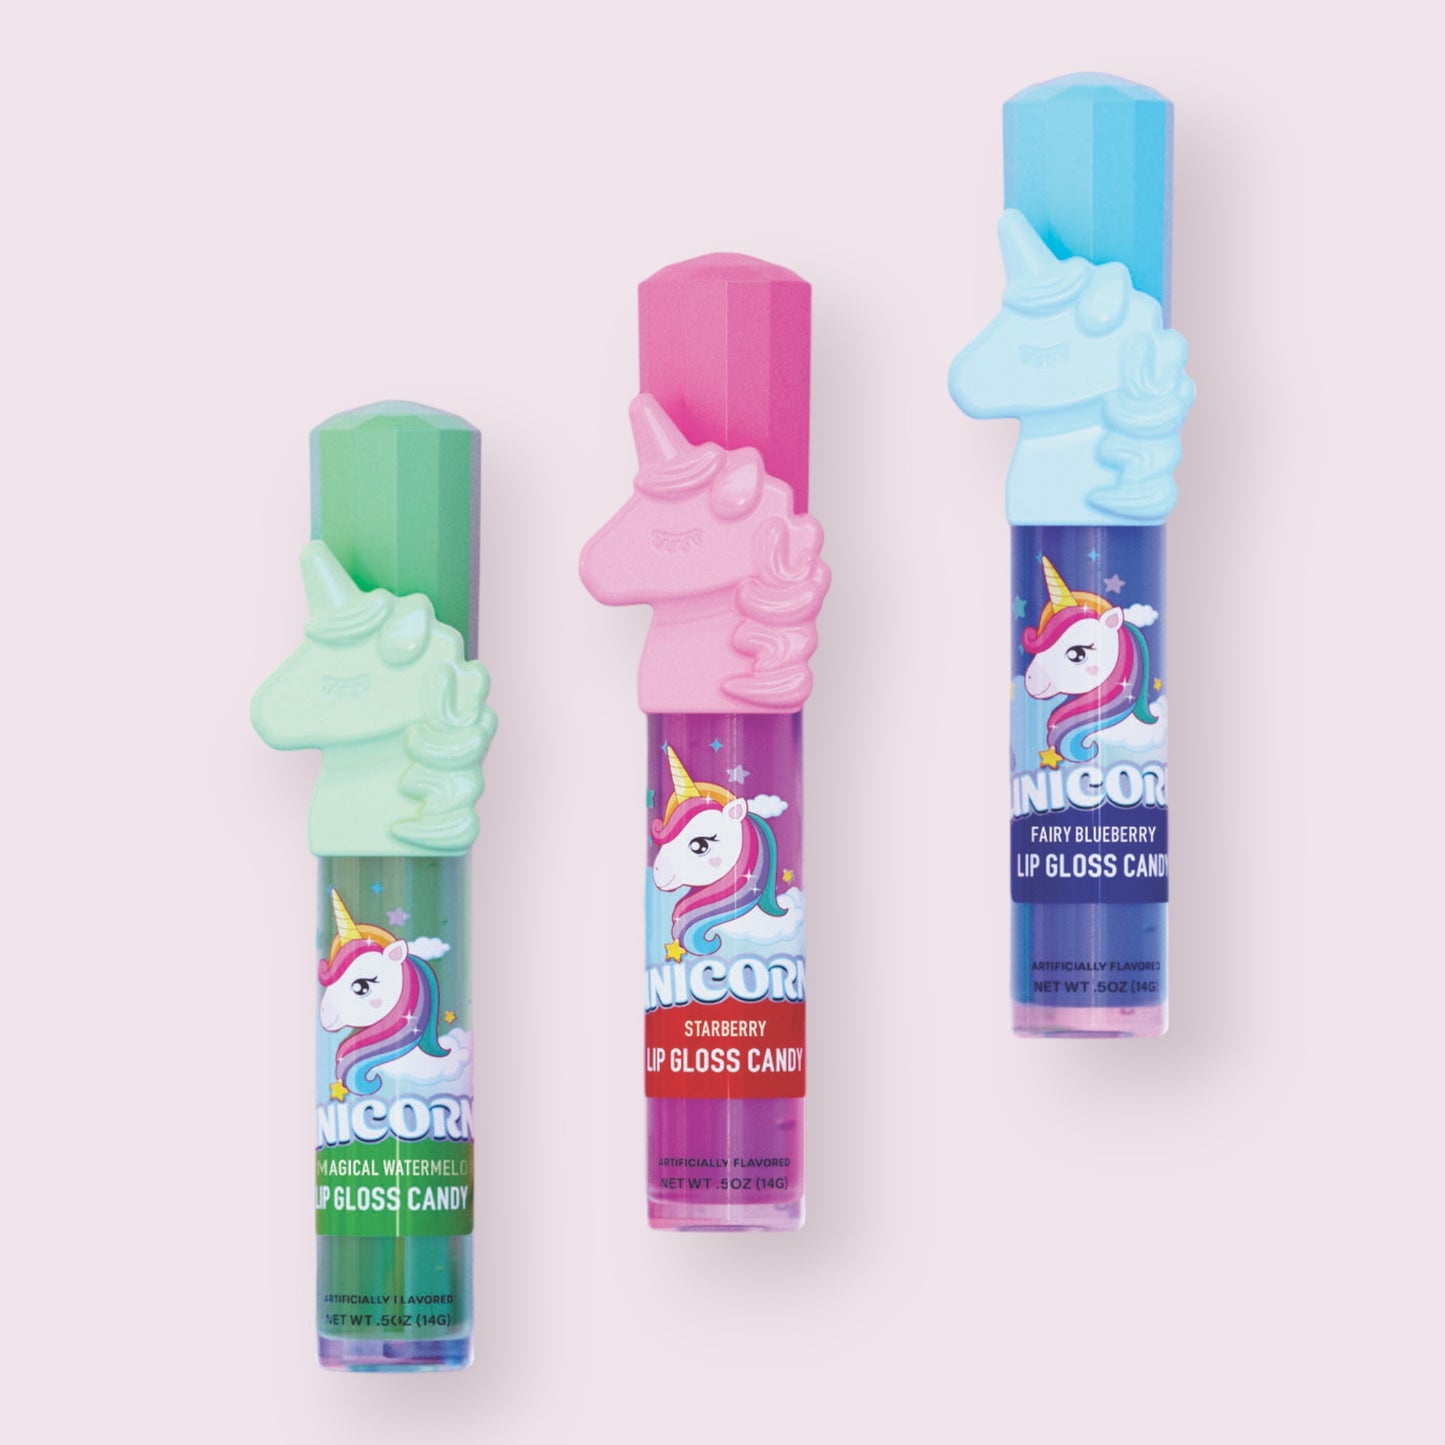 Unicorn Fruit Flavoured Lip Gloss Candy  Pixie Candy Shoppe   